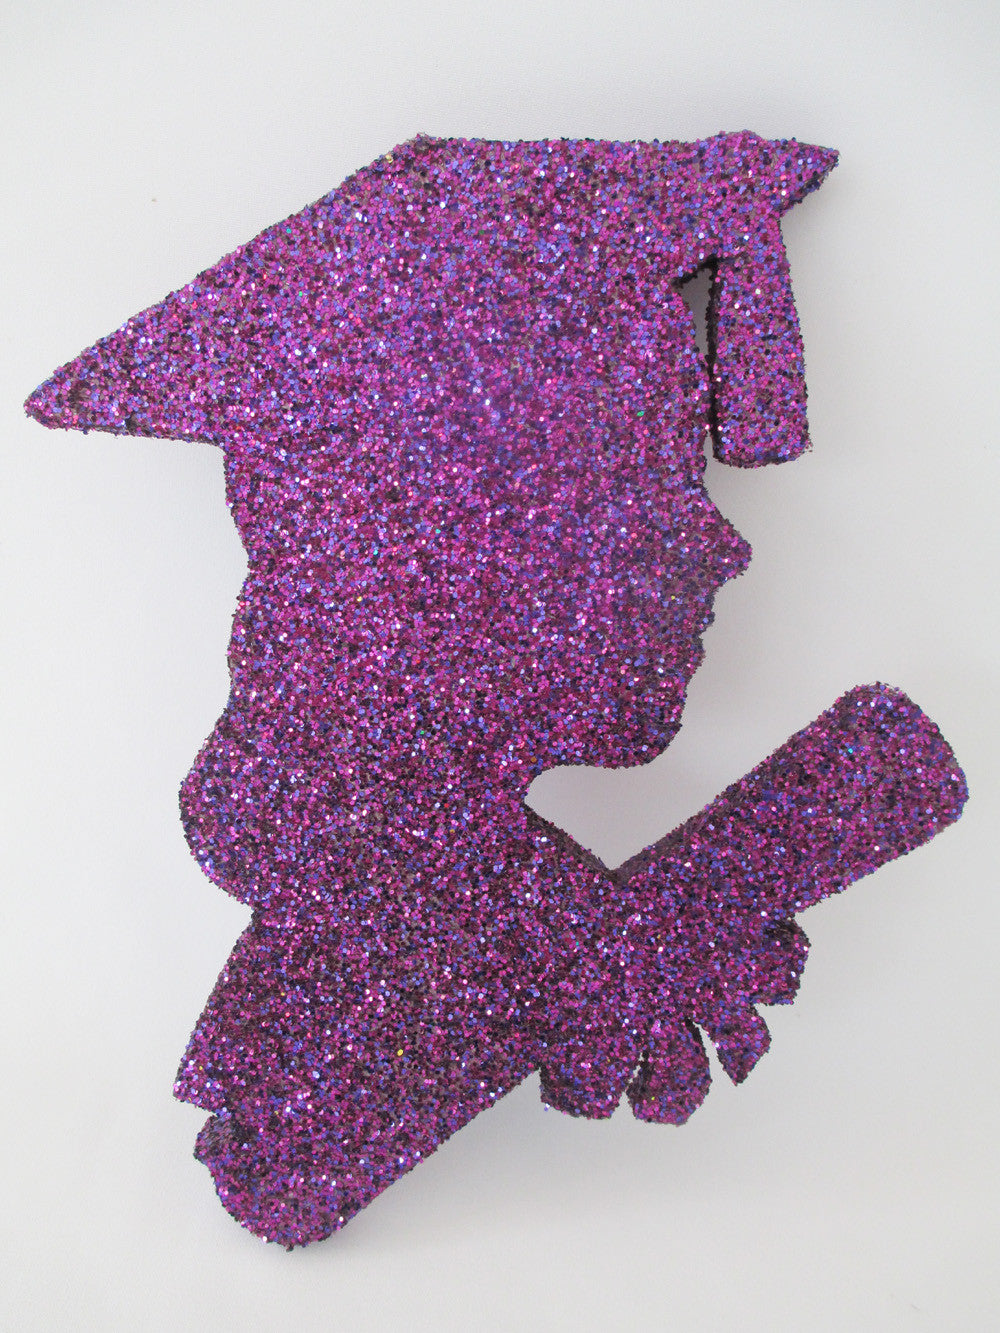 Grad girl head silhouette cutout for centerpiece - Designs by ginny